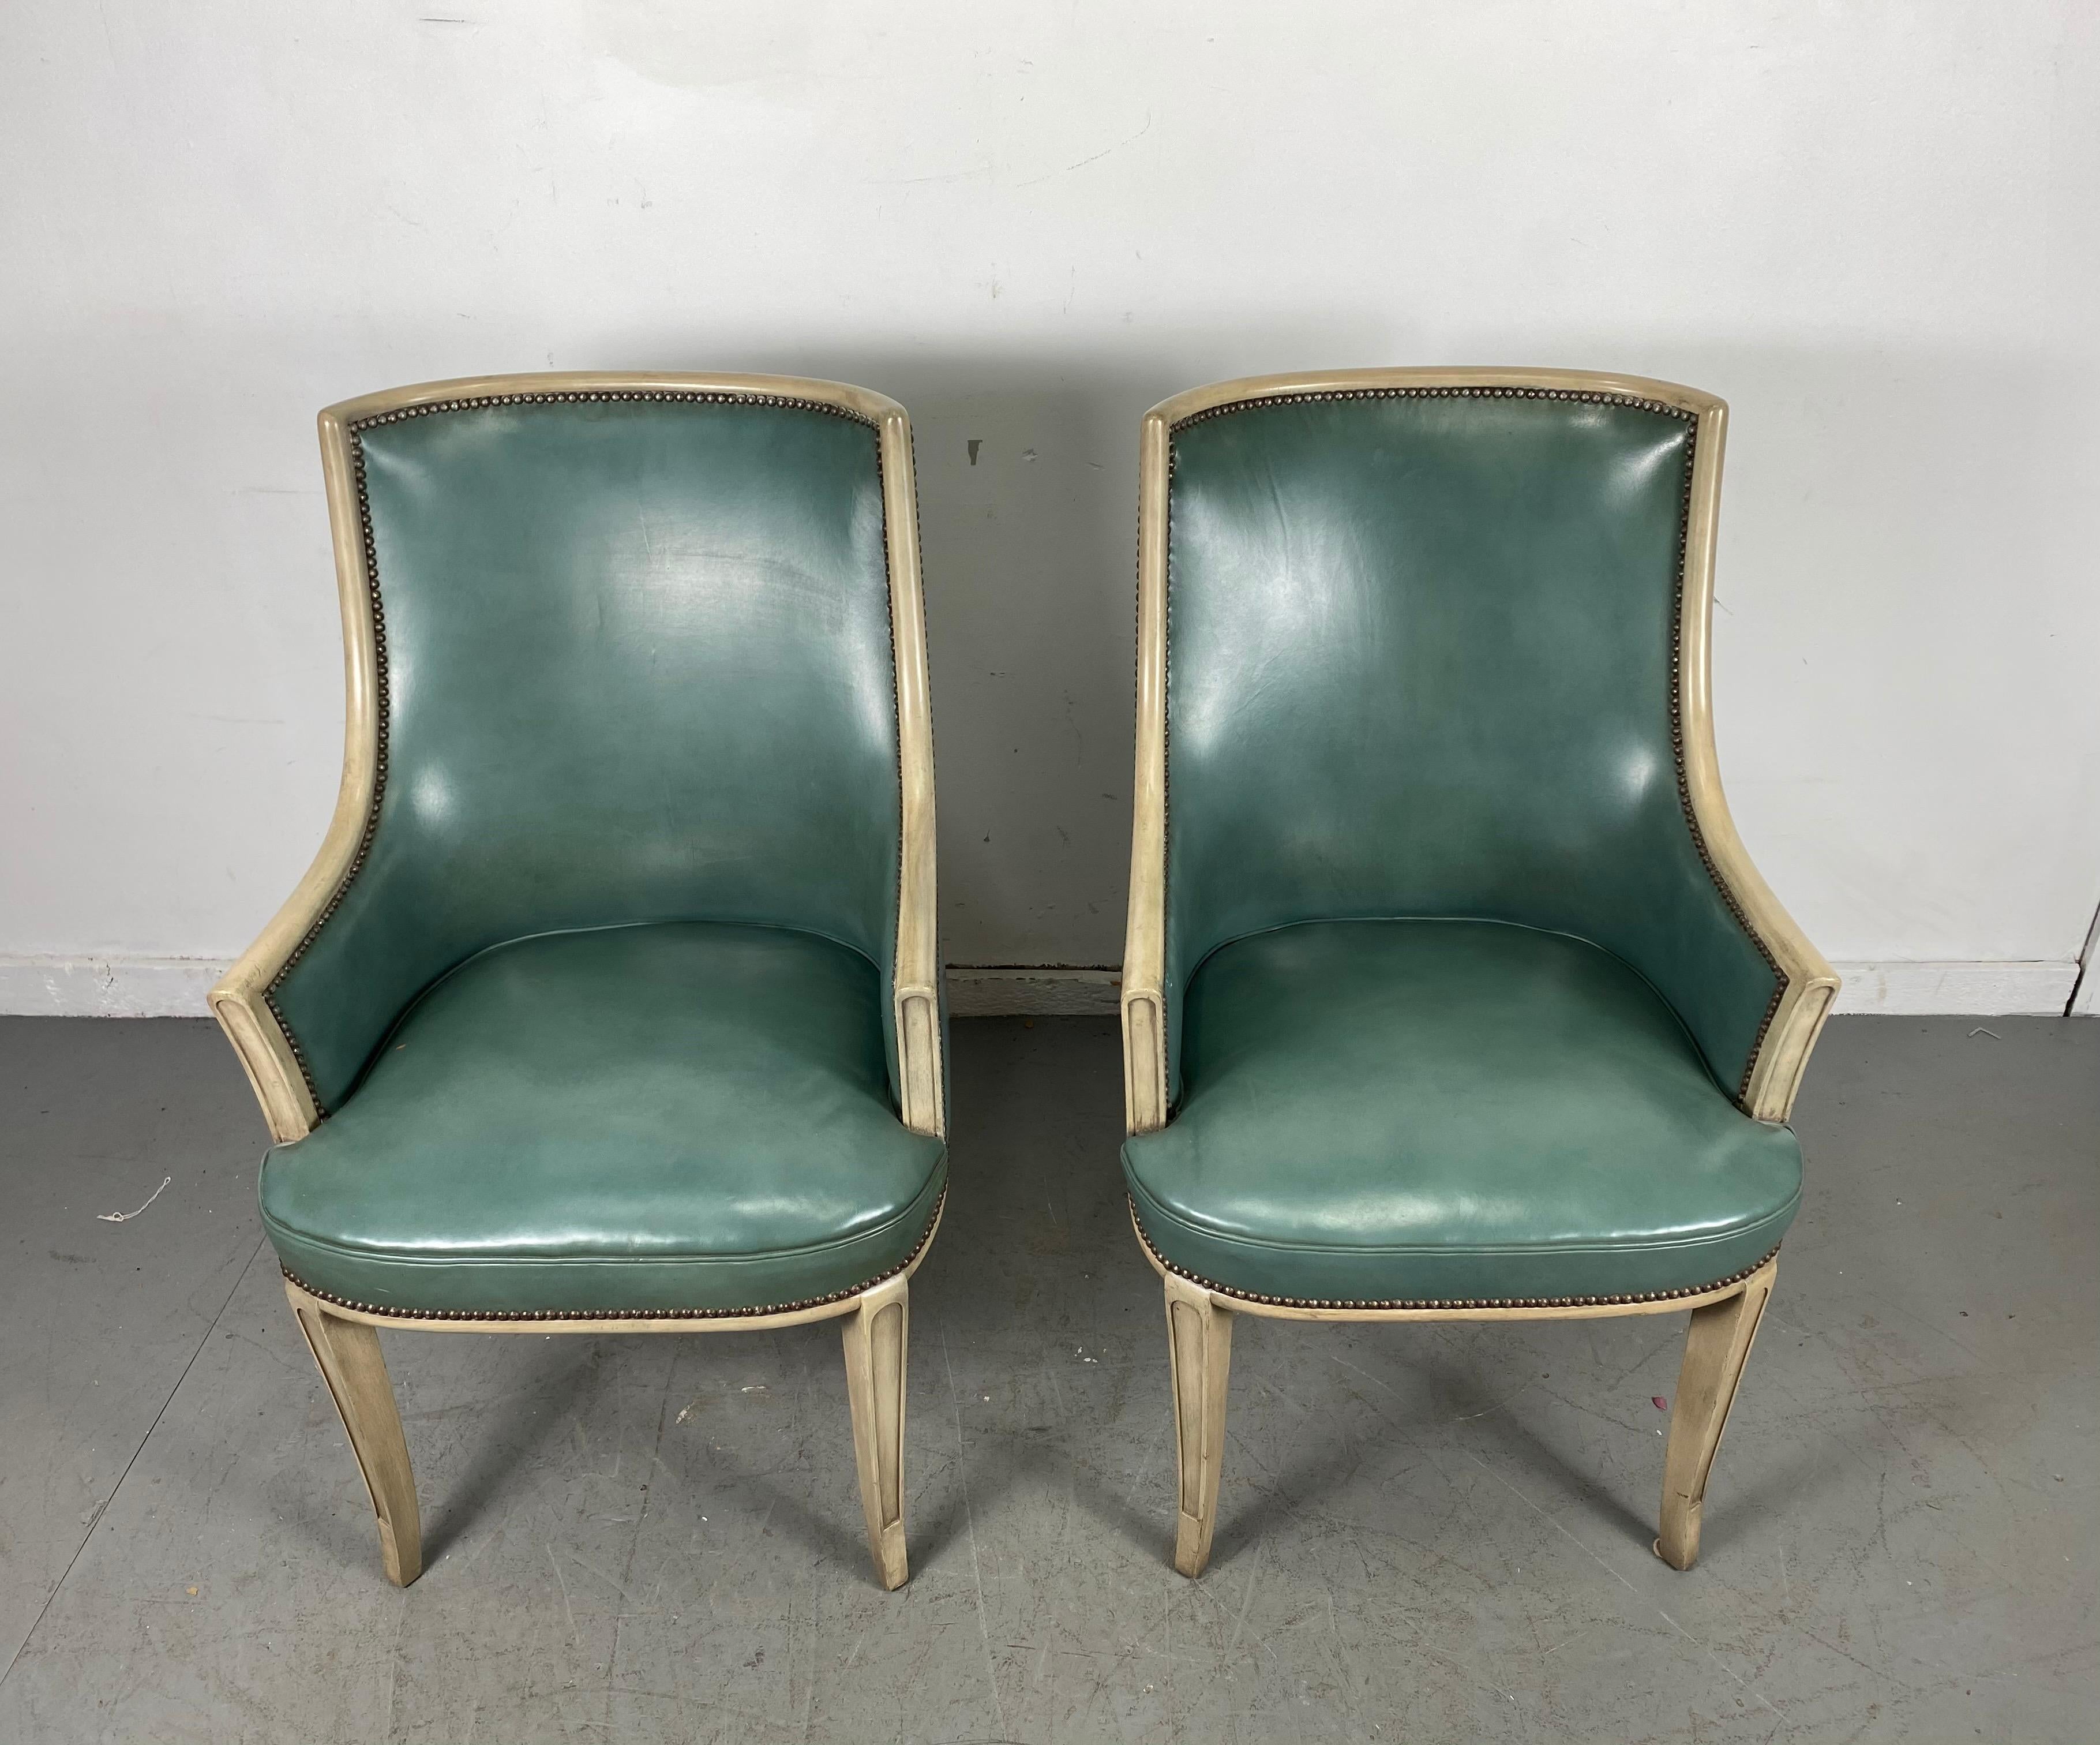 Hollywood Regency Pair of Regency Leather Arm / Lounge Chairs, Attributed to Baker Furniture Co